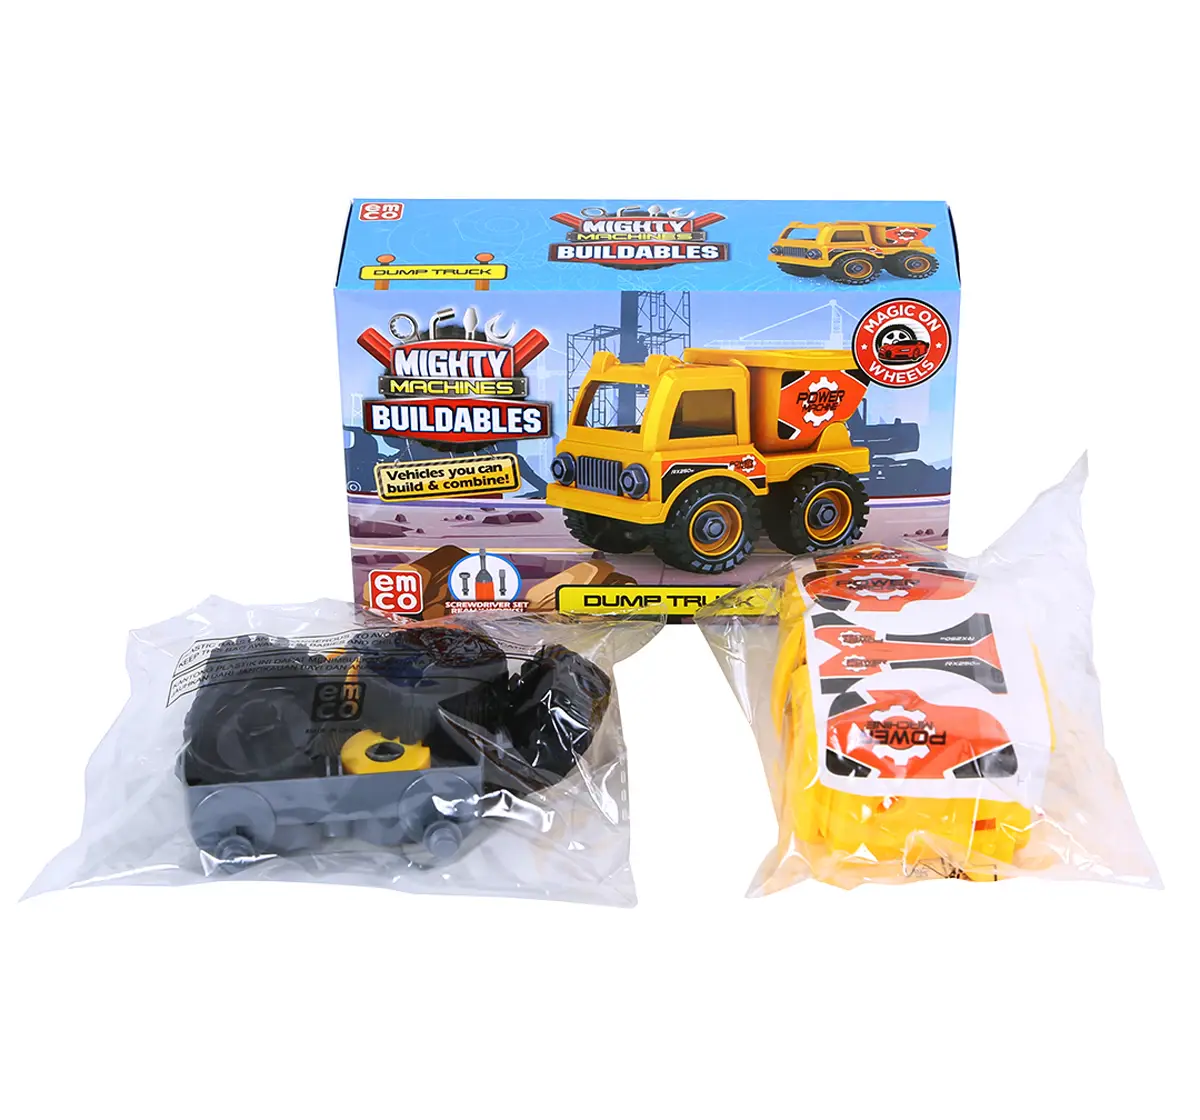 Mighty Machines Buildables Dump Truck